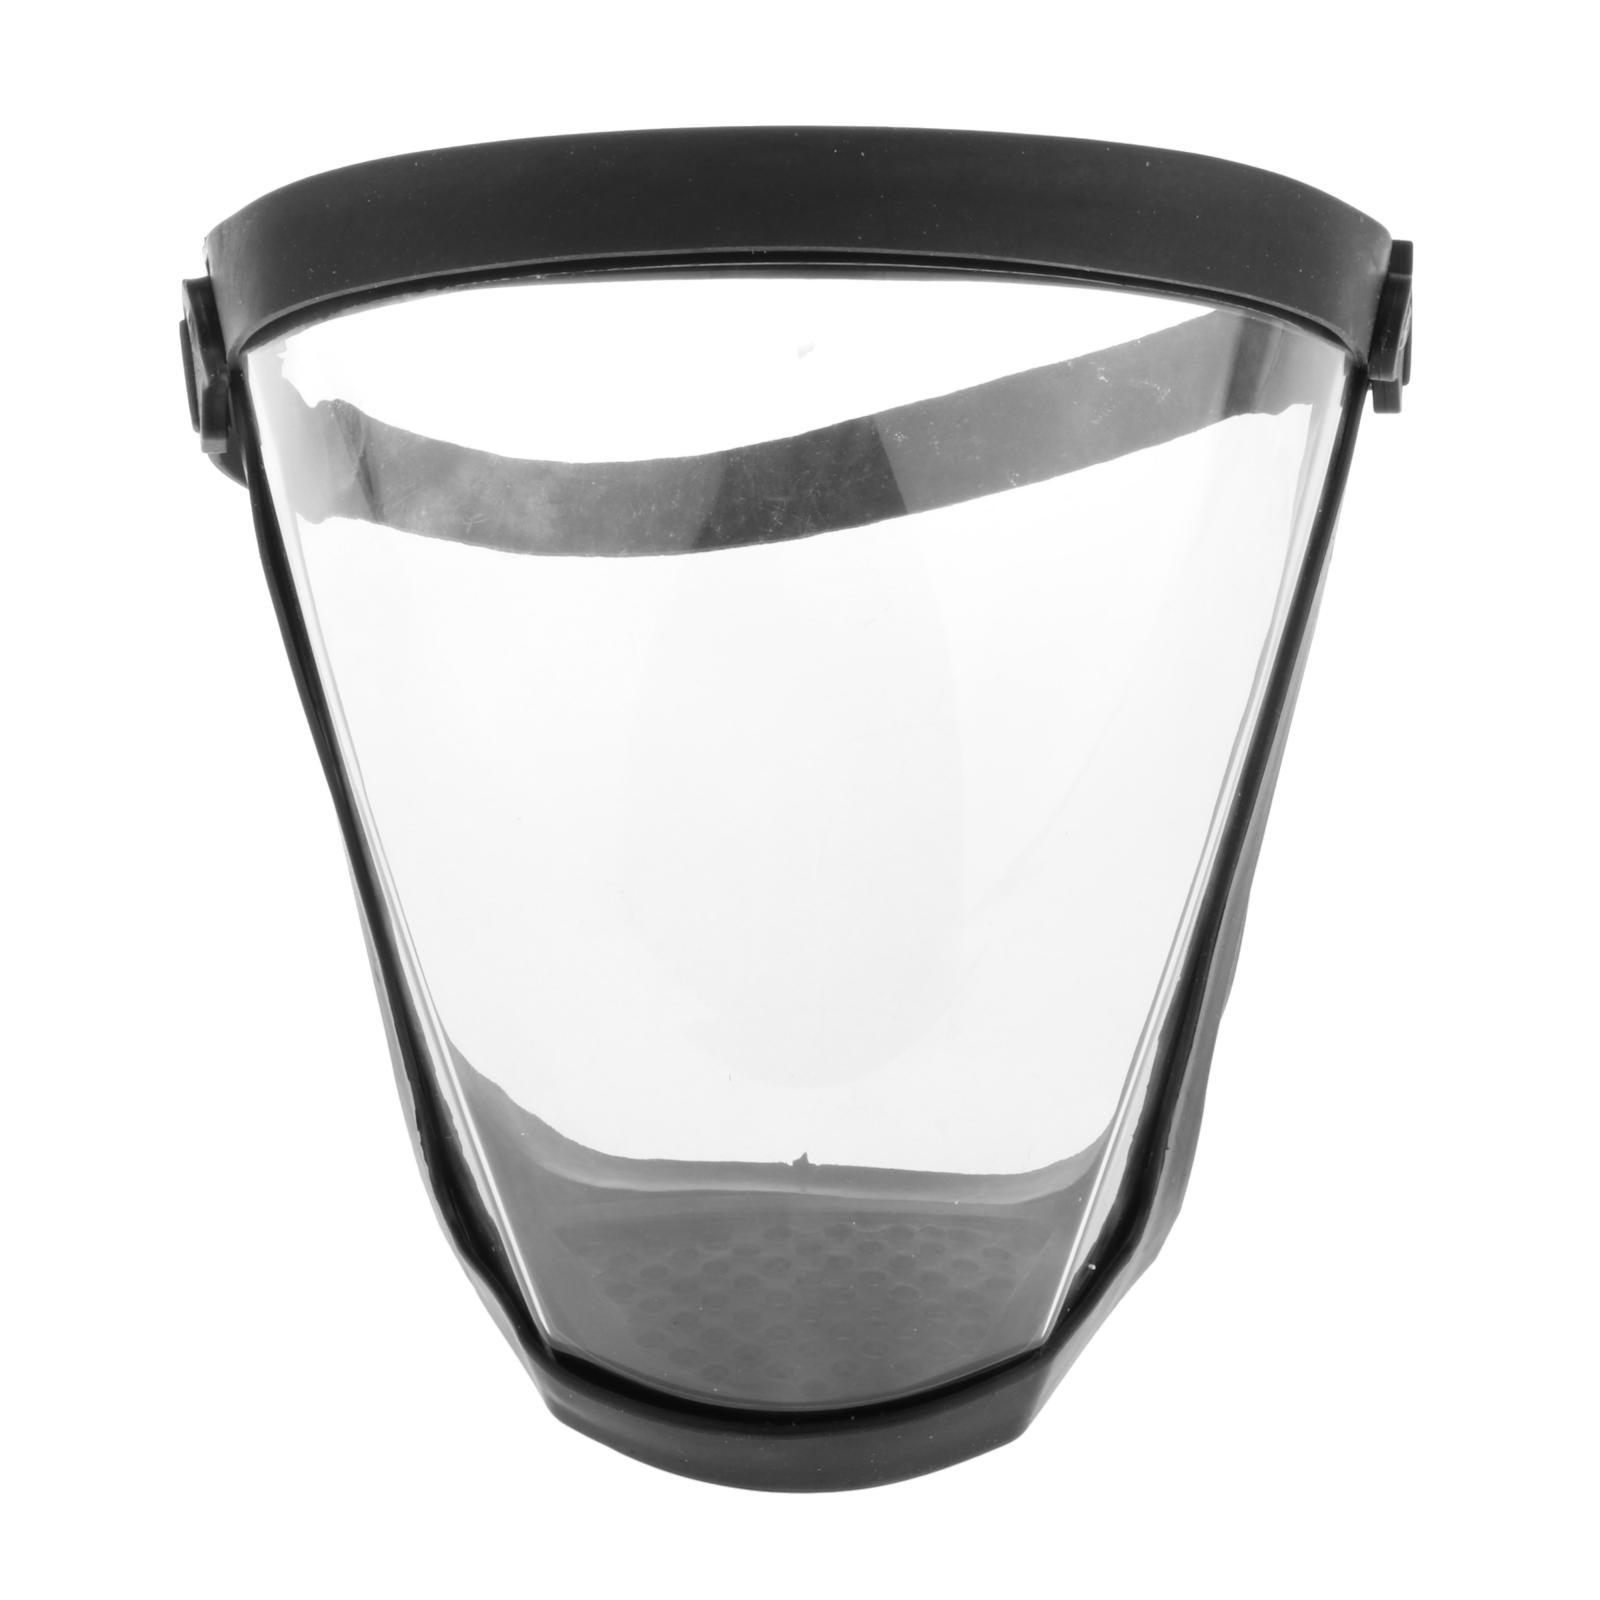 Reusable Full Face Shield PC Covering Clear UV-Protect Visor Protect Cover